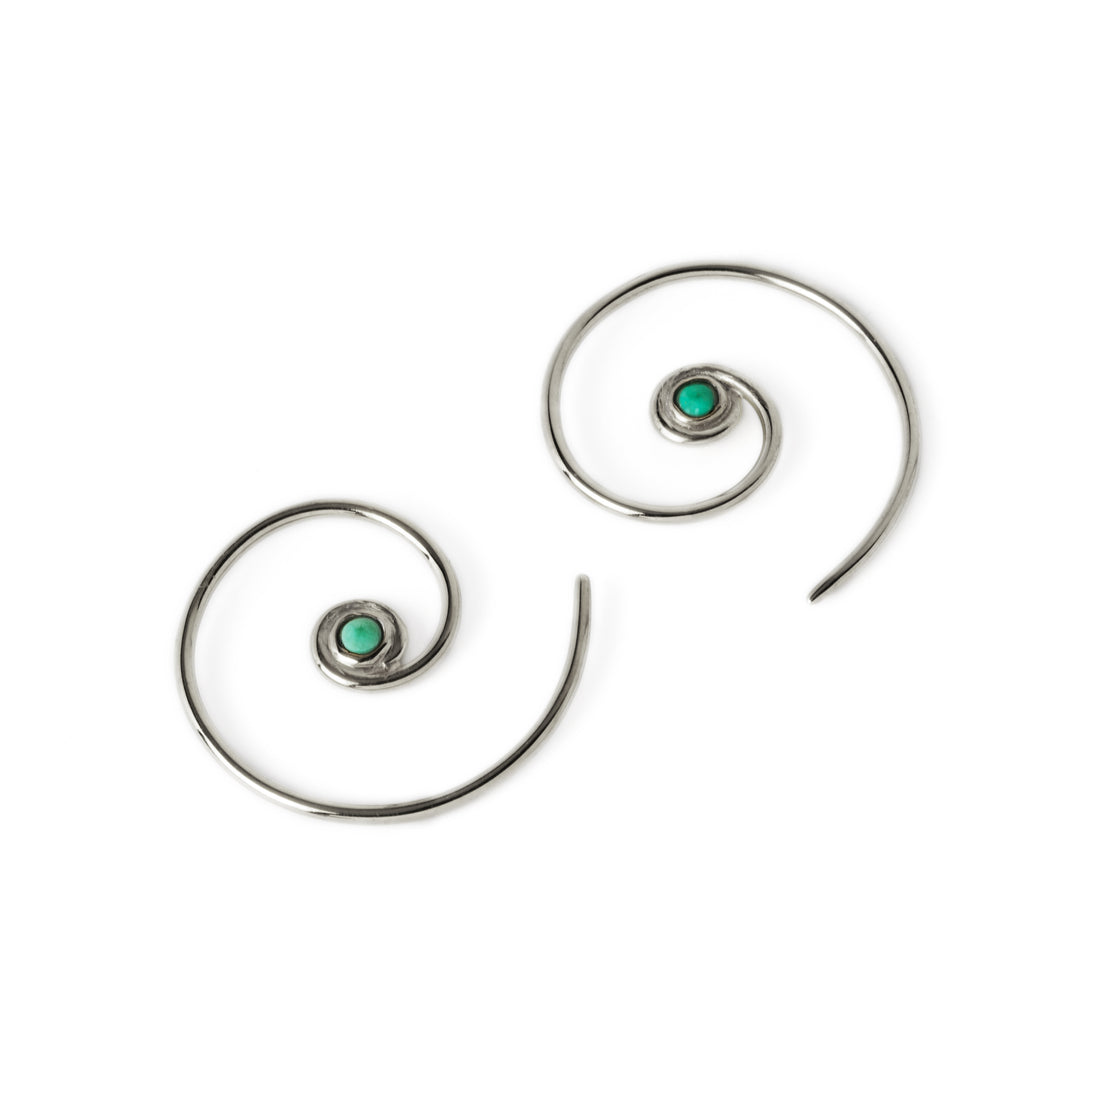 pair of Silver &amp; Turquoise Koru spiral earrings back and front view